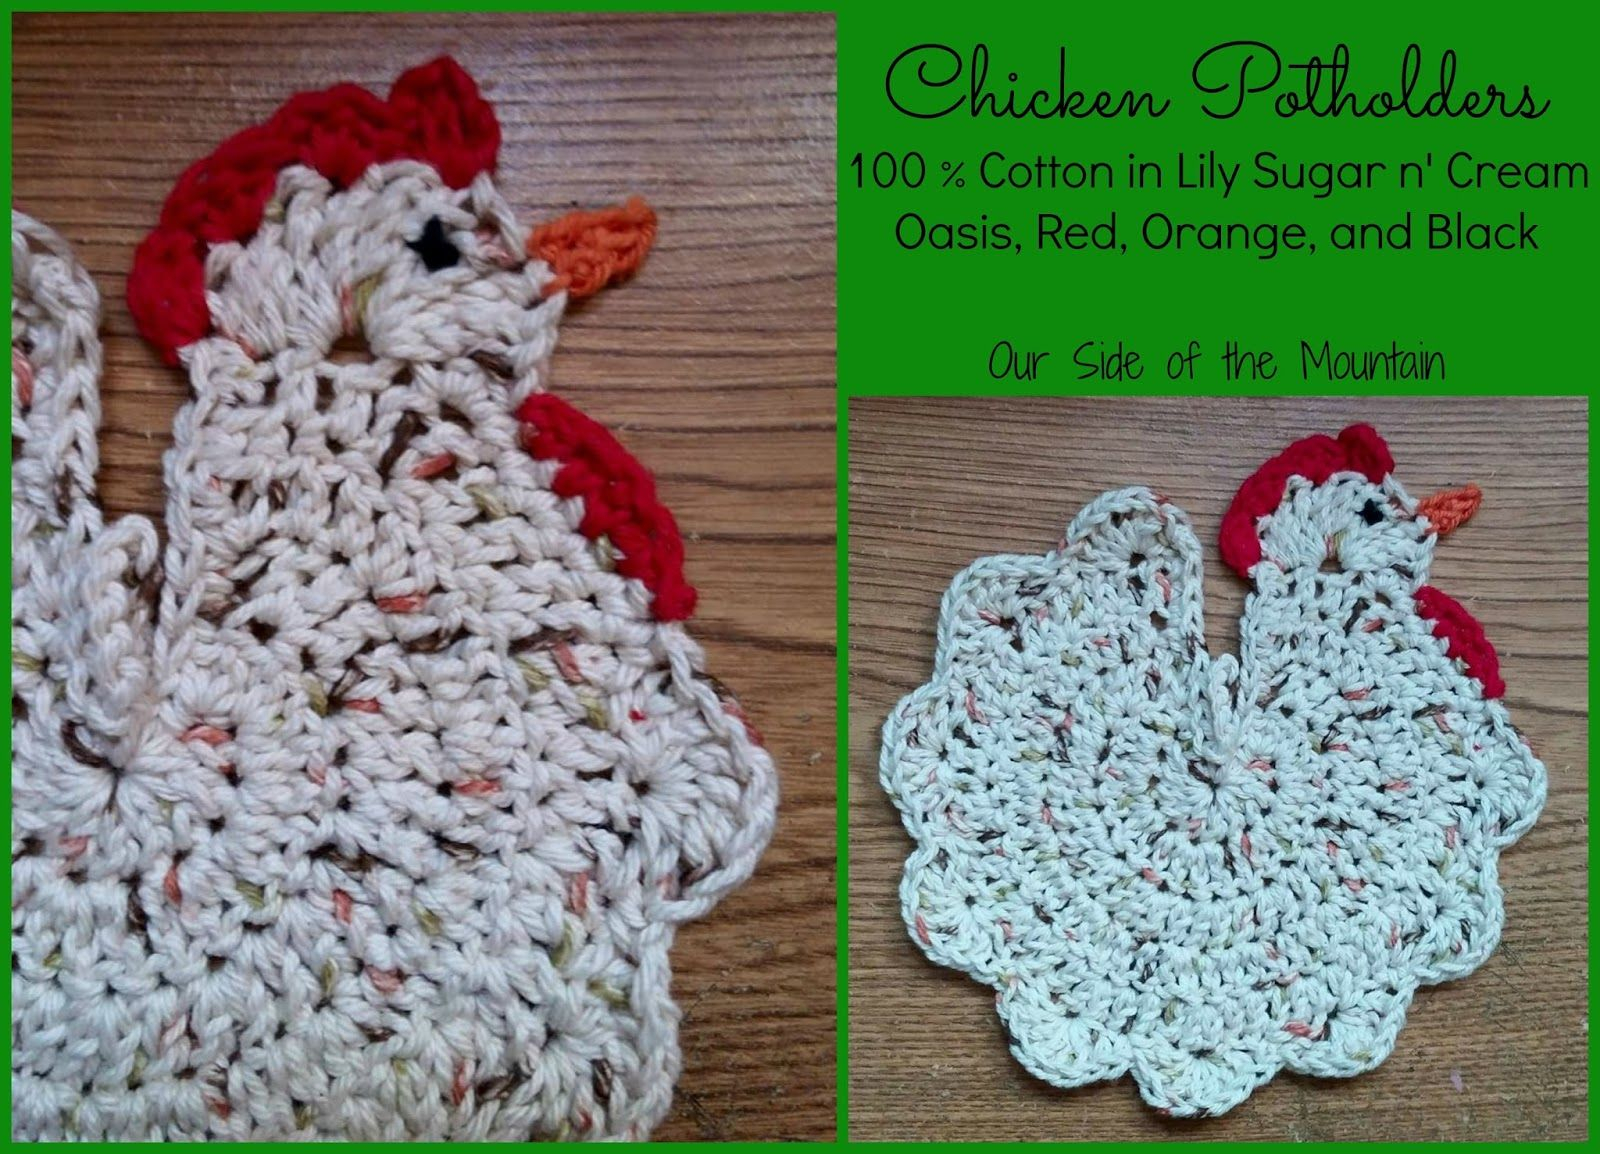 Free Crochet Hot Pad Patterns Our Side Of The Mountain Creative Crochet Chicken Potholders Fun